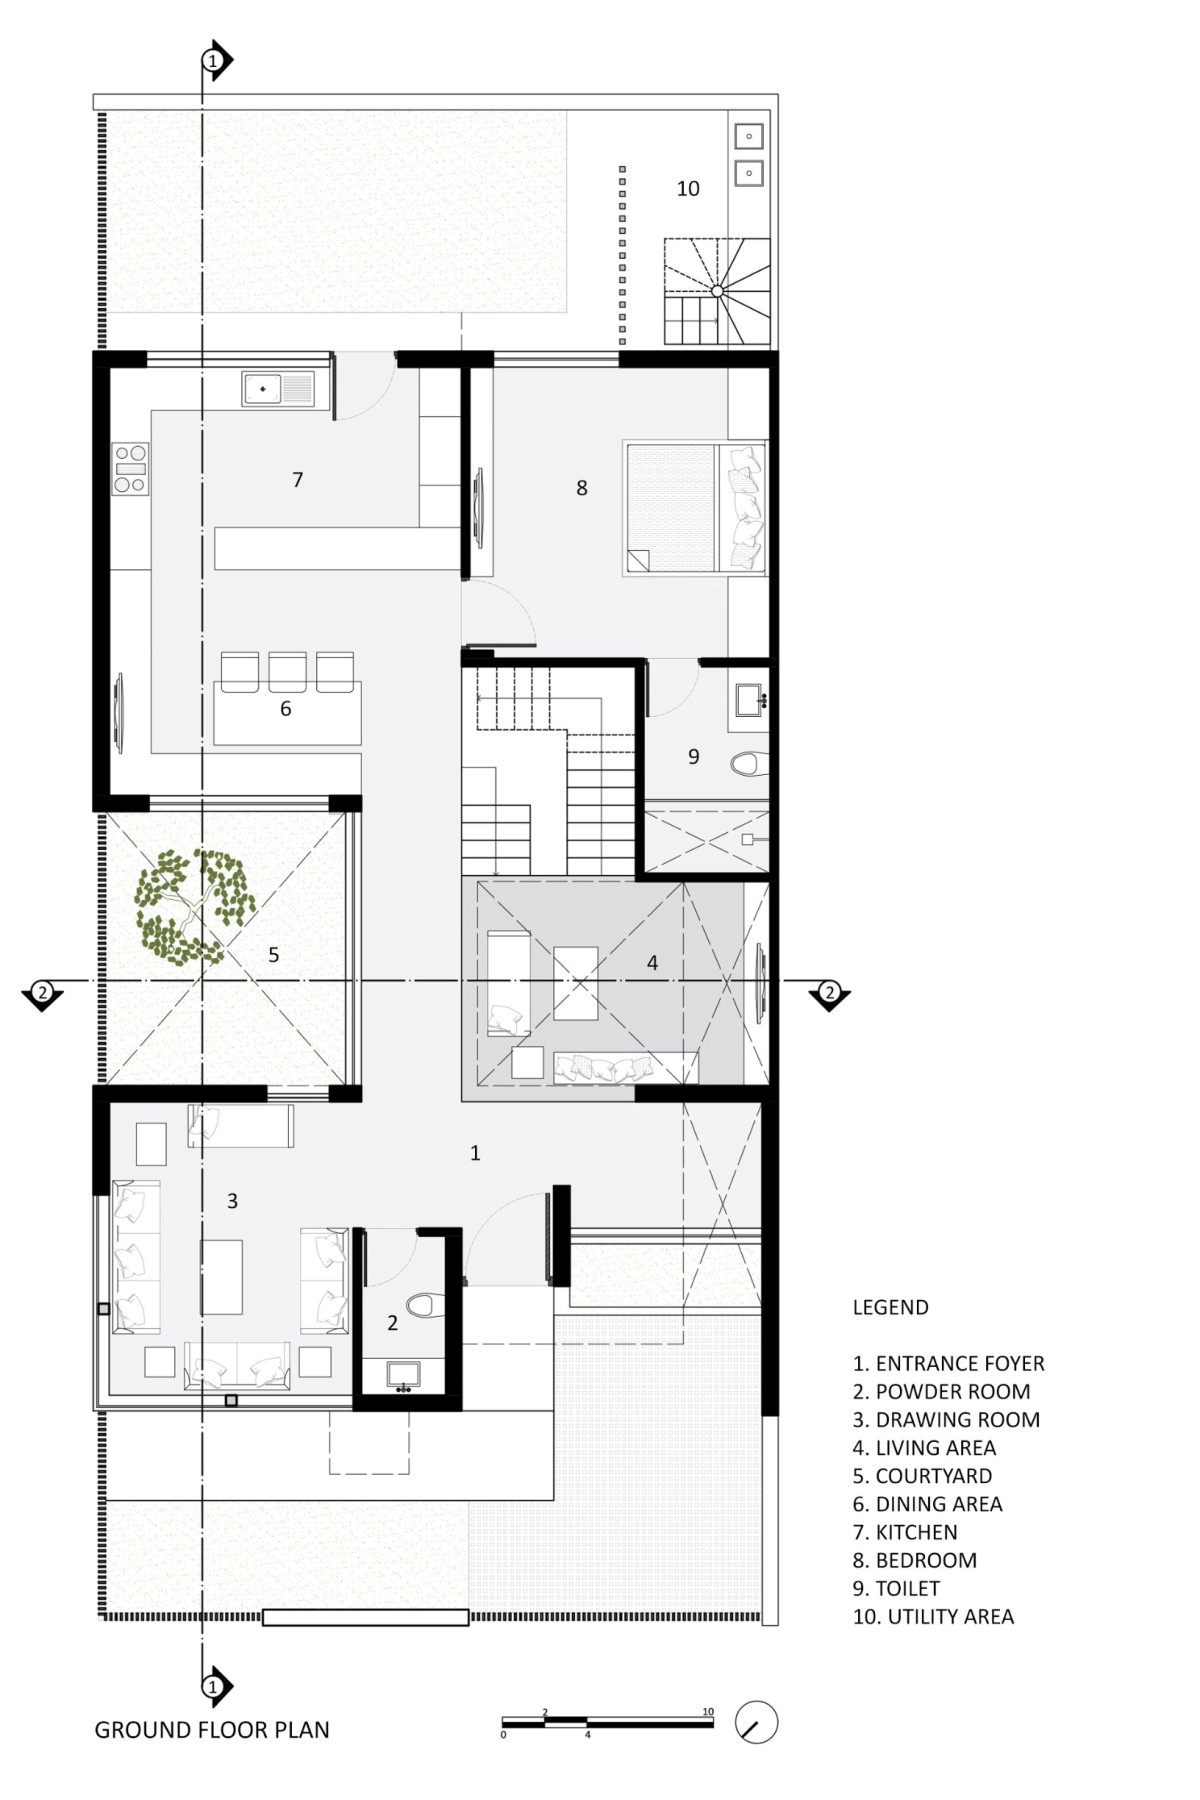 Ground Floor Plan of House Within by Arch.Lab